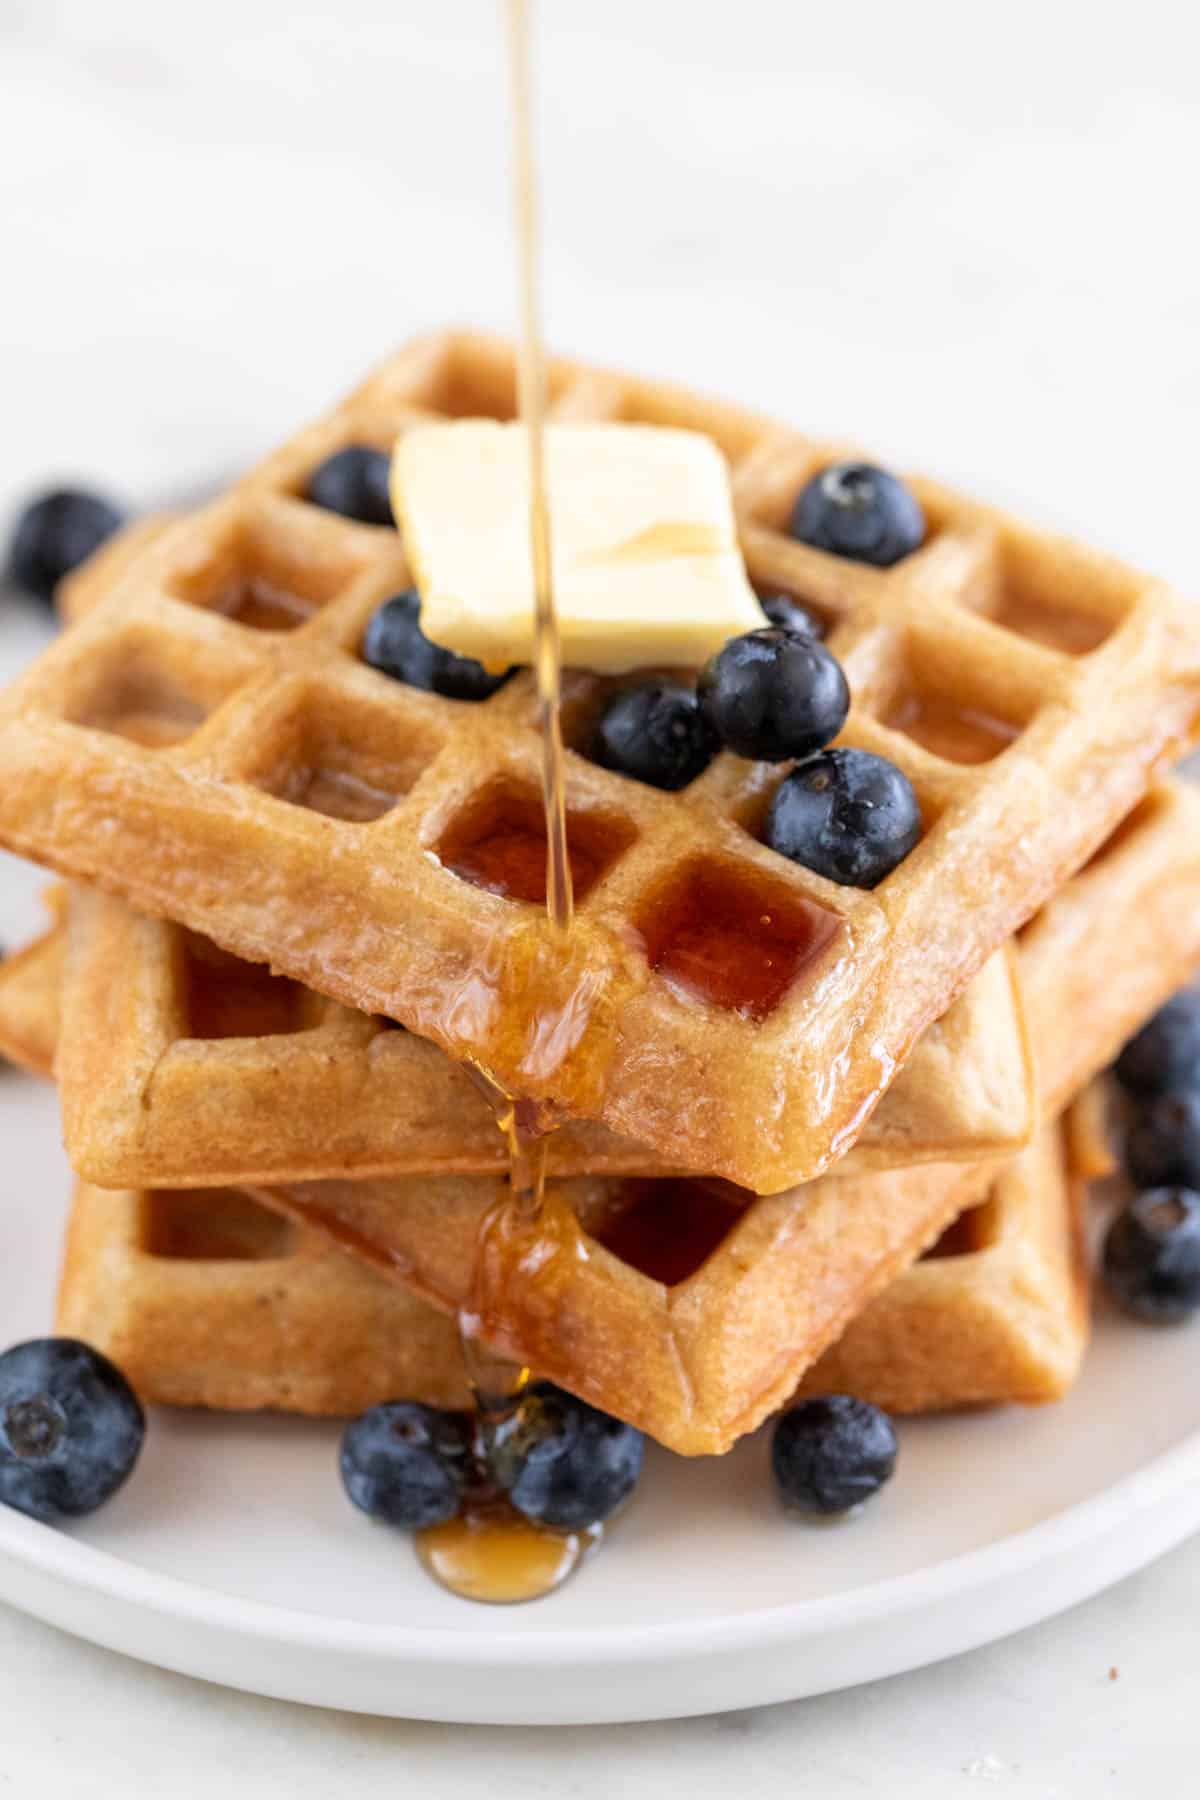 Stacked vegan waffles with blueberries, vegan butter, and maple syrup drizzle.